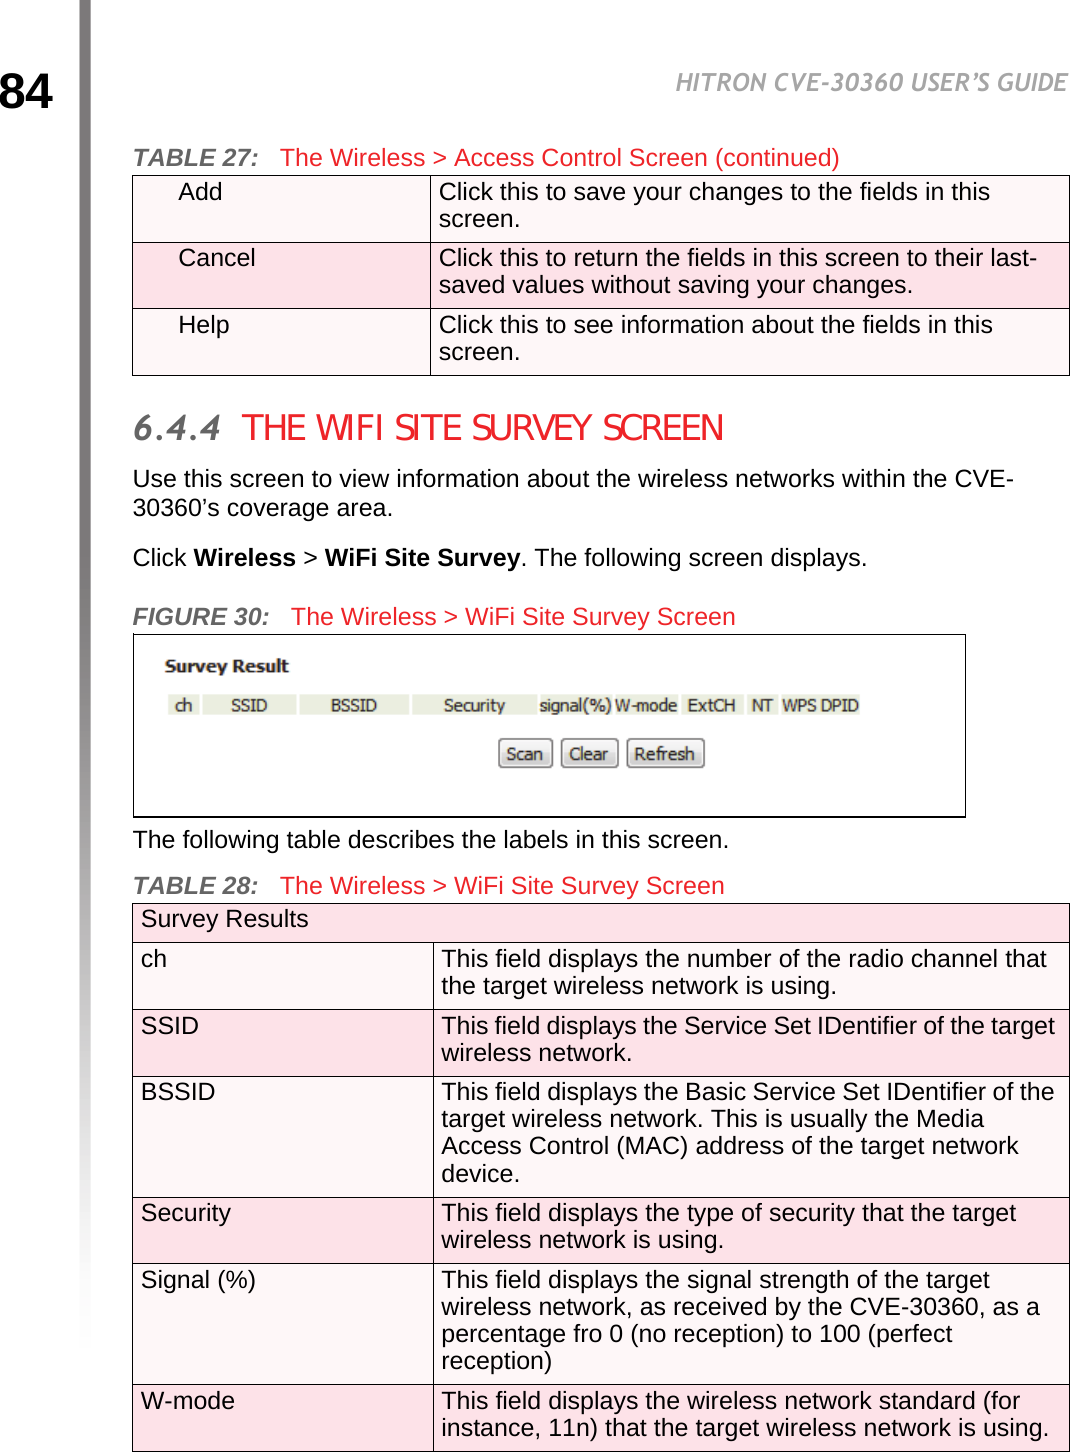 84HITRON CVE-30360 USER’S GUIDEWIRELESS6.4.4  THE WIFI SITE SURVEY SCREENUse this screen to view information about the wireless networks within the CVE-30360’s coverage area.Click Wireless &gt; WiFi Site Survey. The following screen displays.FIGURE 30:   The Wireless &gt; WiFi Site Survey ScreenThe following table describes the labels in this screen.Add Click this to save your changes to the fields in this screen.Cancel Click this to return the fields in this screen to their last-saved values without saving your changes.Help Click this to see information about the fields in this screen.TABLE 28:   The Wireless &gt; WiFi Site Survey Screen Survey Resultsch This field displays the number of the radio channel that the target wireless network is using.SSID This field displays the Service Set IDentifier of the target wireless network.BSSID This field displays the Basic Service Set IDentifier of the target wireless network. This is usually the Media Access Control (MAC) address of the target network device.Security This field displays the type of security that the target wireless network is using.Signal (%) This field displays the signal strength of the target wireless network, as received by the CVE-30360, as a percentage fro 0 (no reception) to 100 (perfect reception)W-mode This field displays the wireless network standard (for instance, 11n) that the target wireless network is using.TABLE 27:   The Wireless &gt; Access Control Screen (continued)